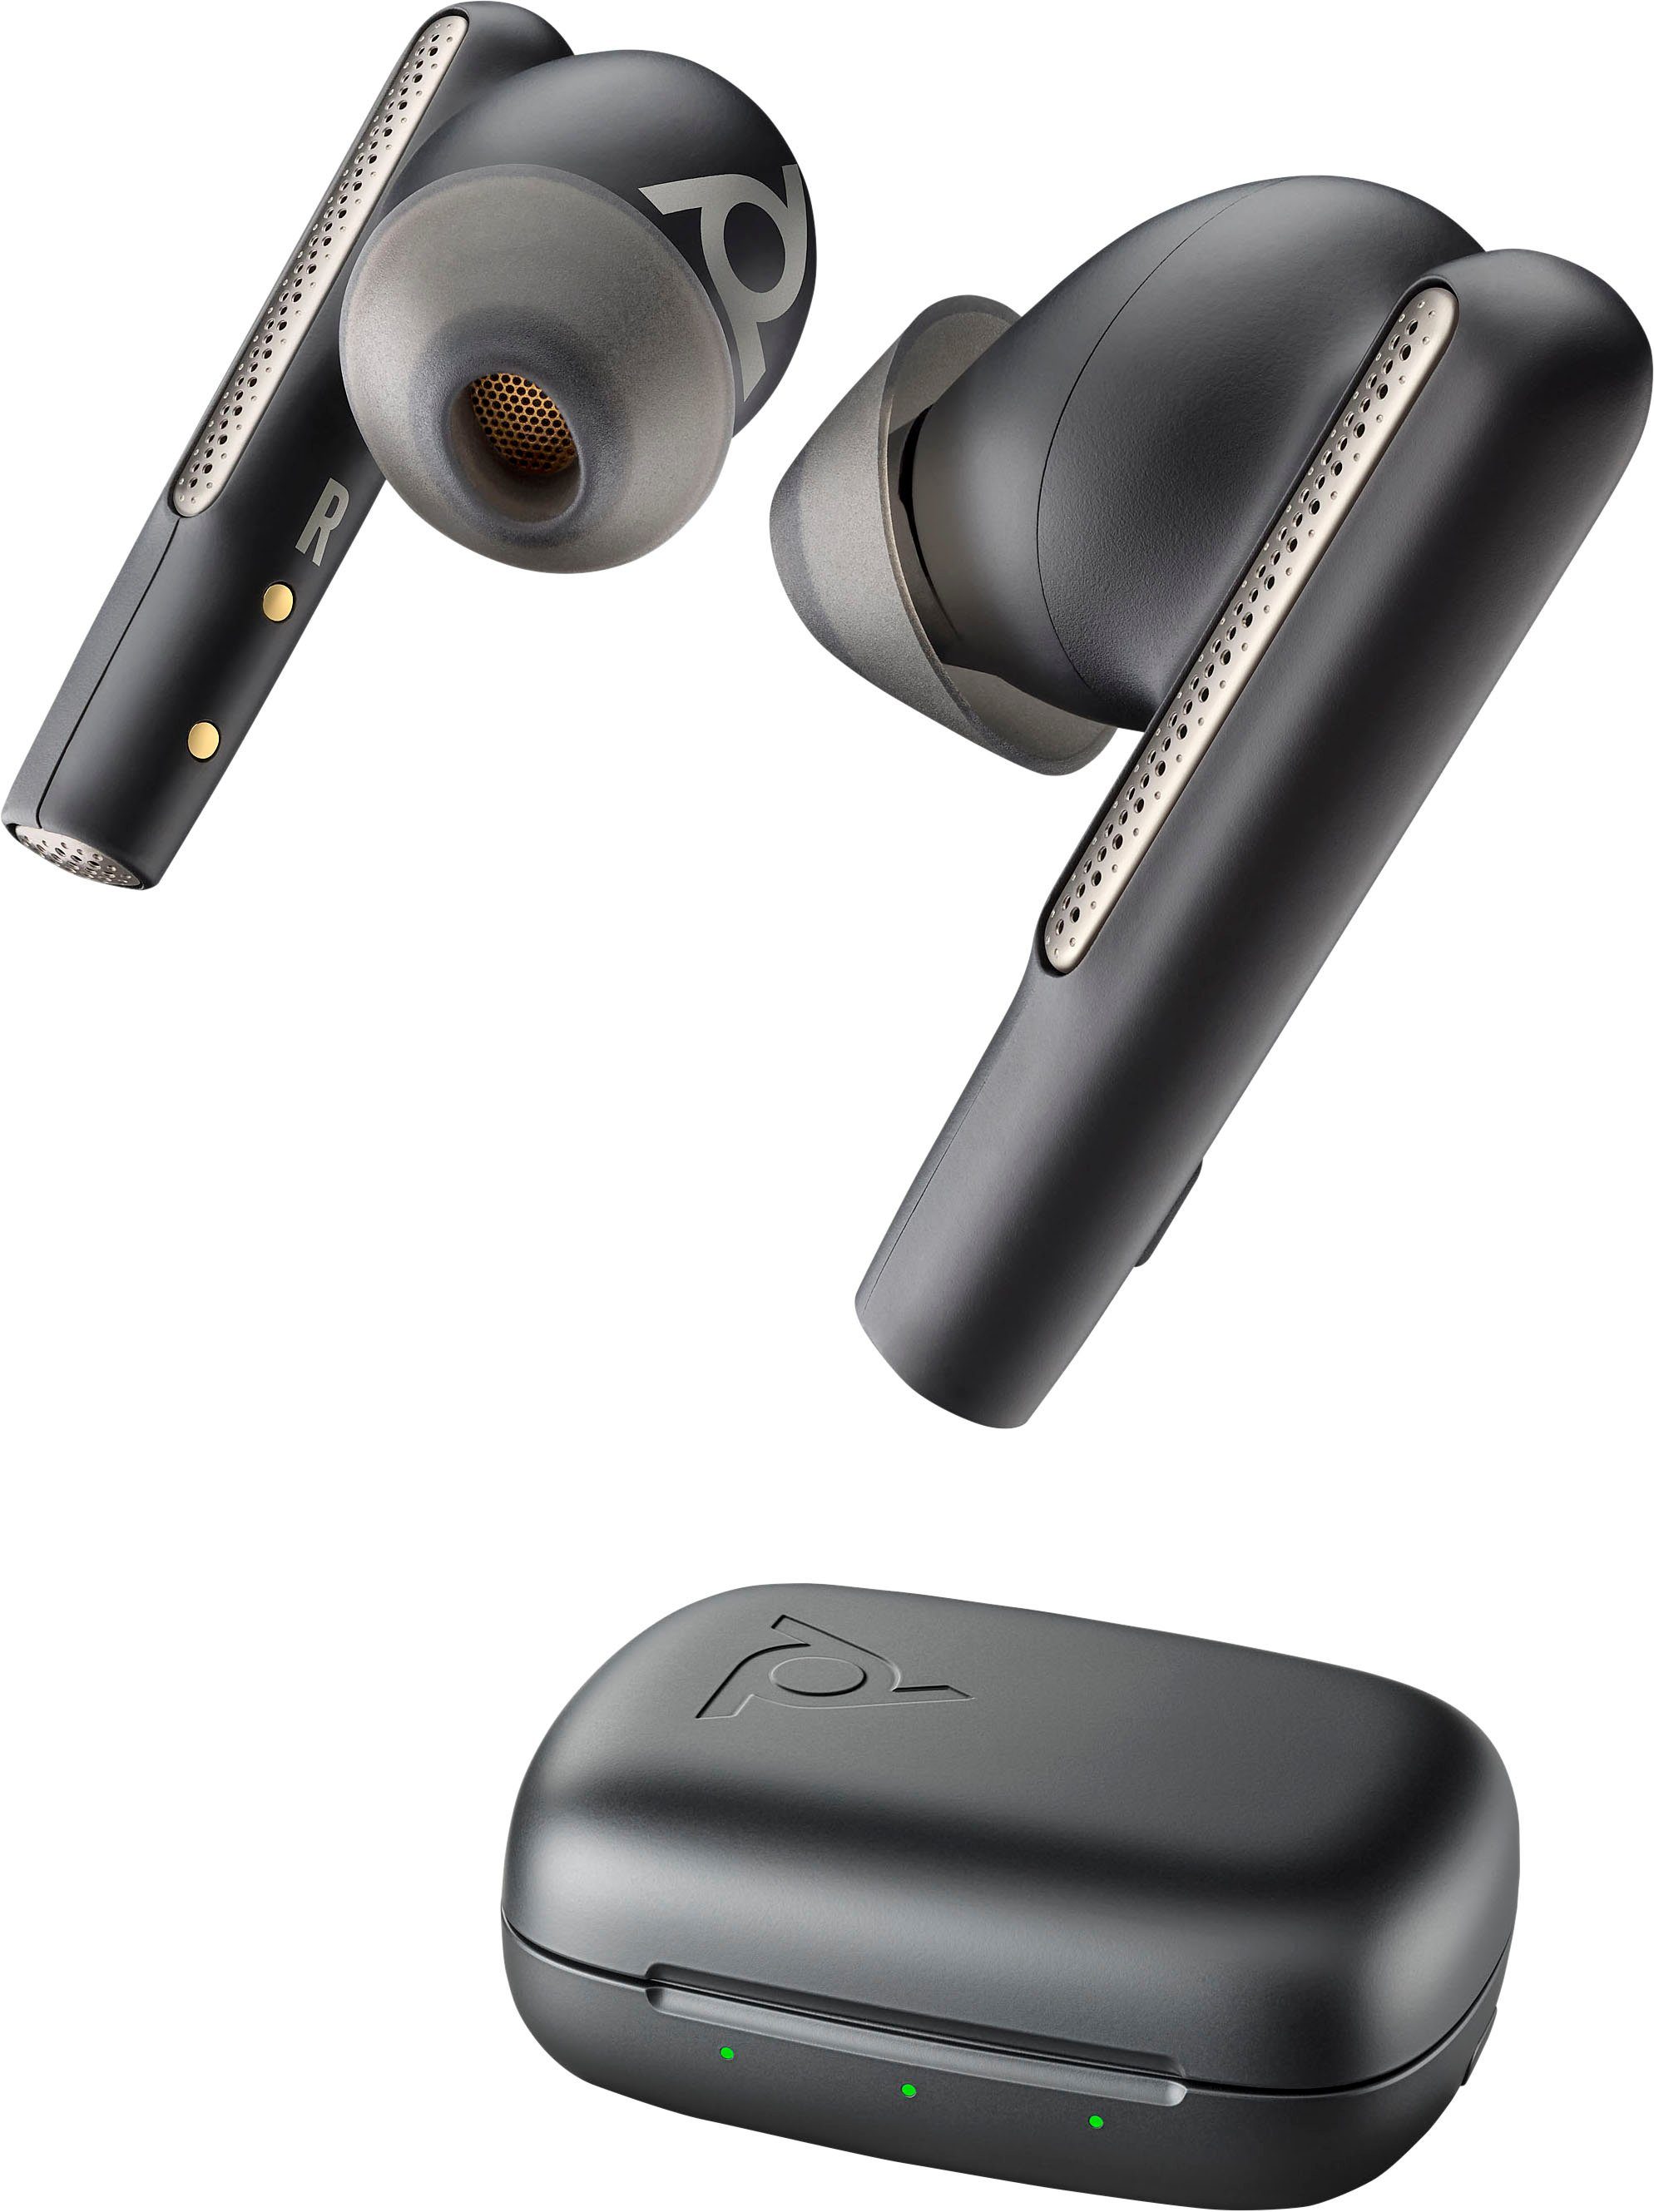 Poly Noise USB-C/A) wireless (Active 60 (ANC), In-Ear-Kopfhörer Cancelling Free Voyager